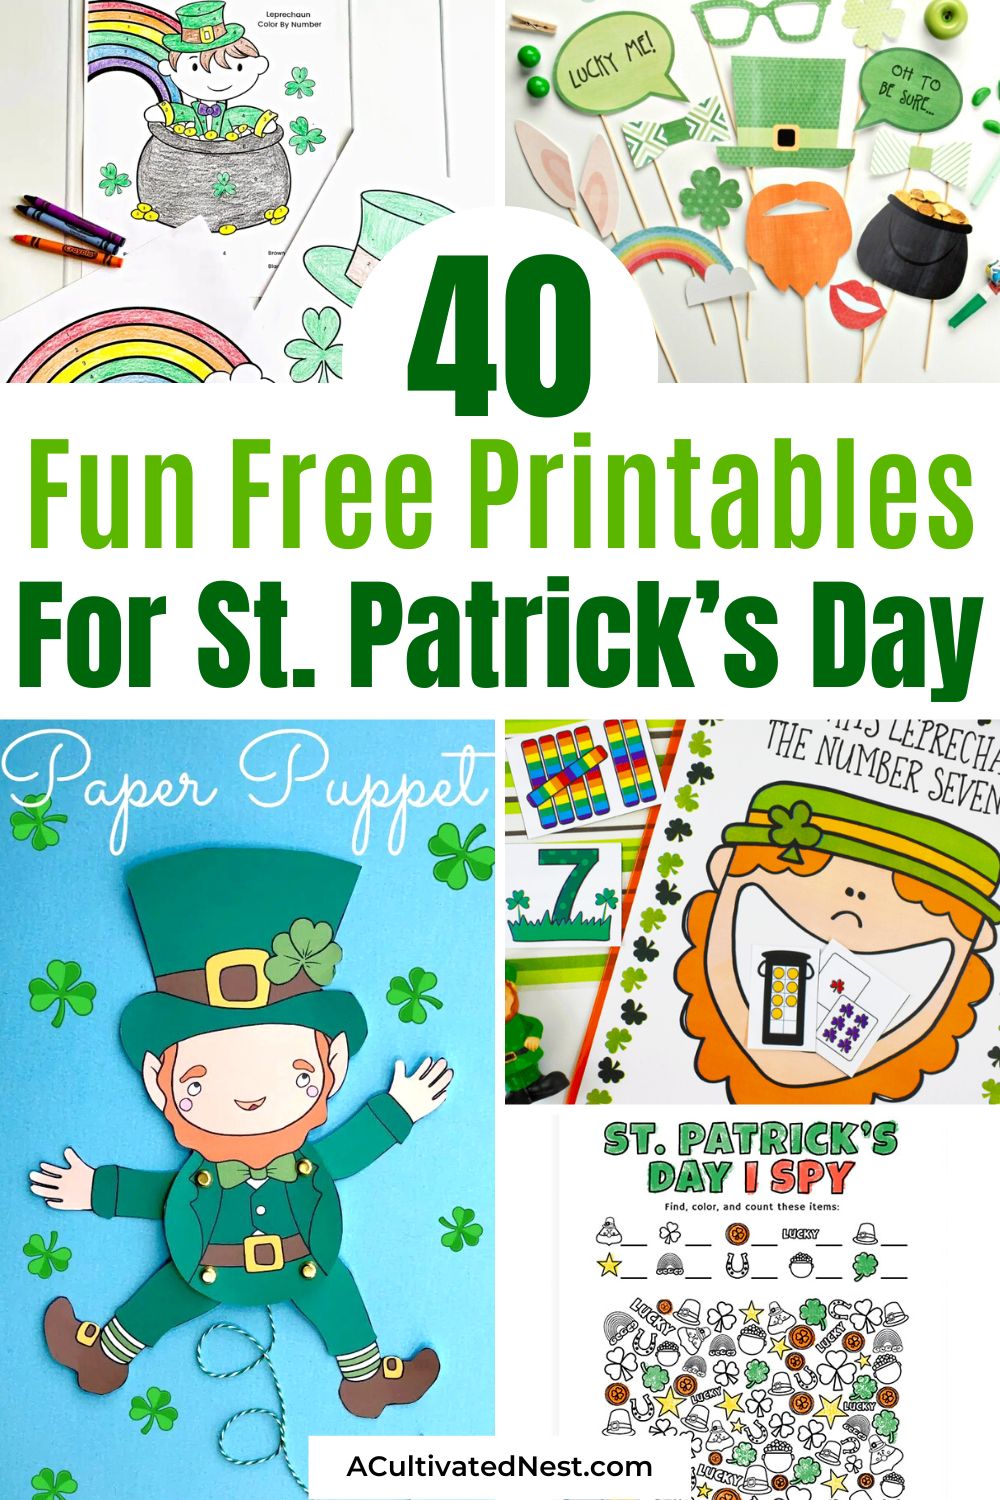 40 Fun Free St. Patrick's Day Printables- Luck is on your side with these delightful free St. Patrick's Day printables! Whether you're decorating, crafting, or celebrating with the kids, these freebies will add a touch of magic to your festivities. | #printables #StPatricksDay #StPattysDay #kidsCrafts #ACultivatedNest